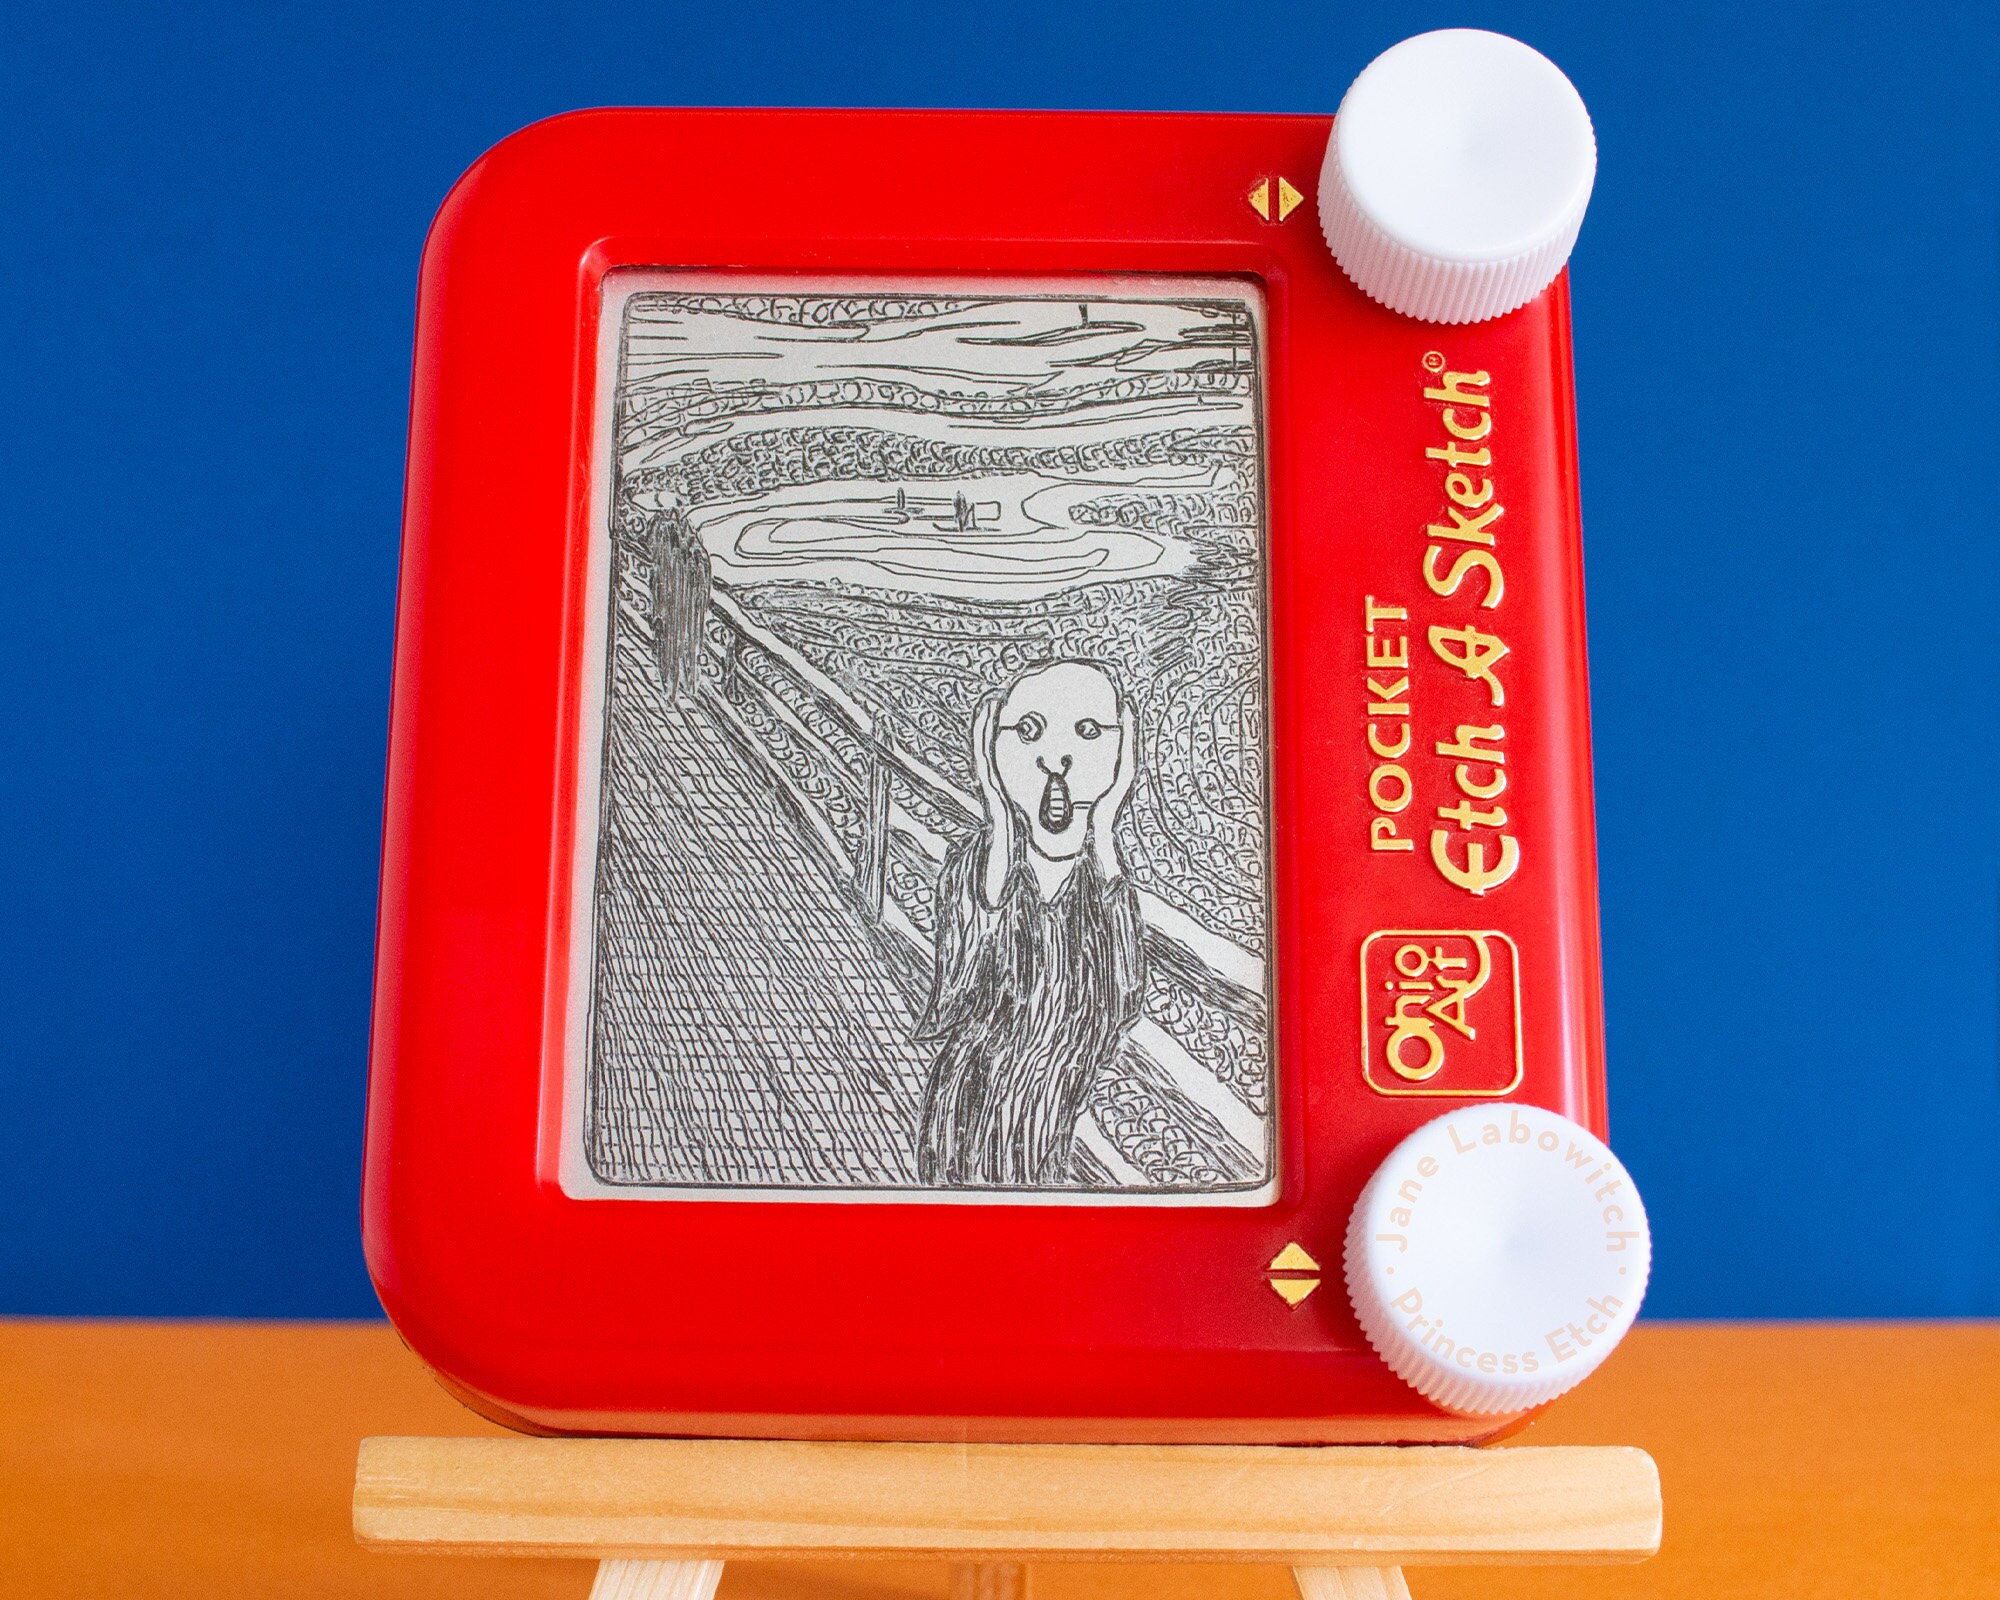 Giant Etch A Sketch - Event Host Bookings